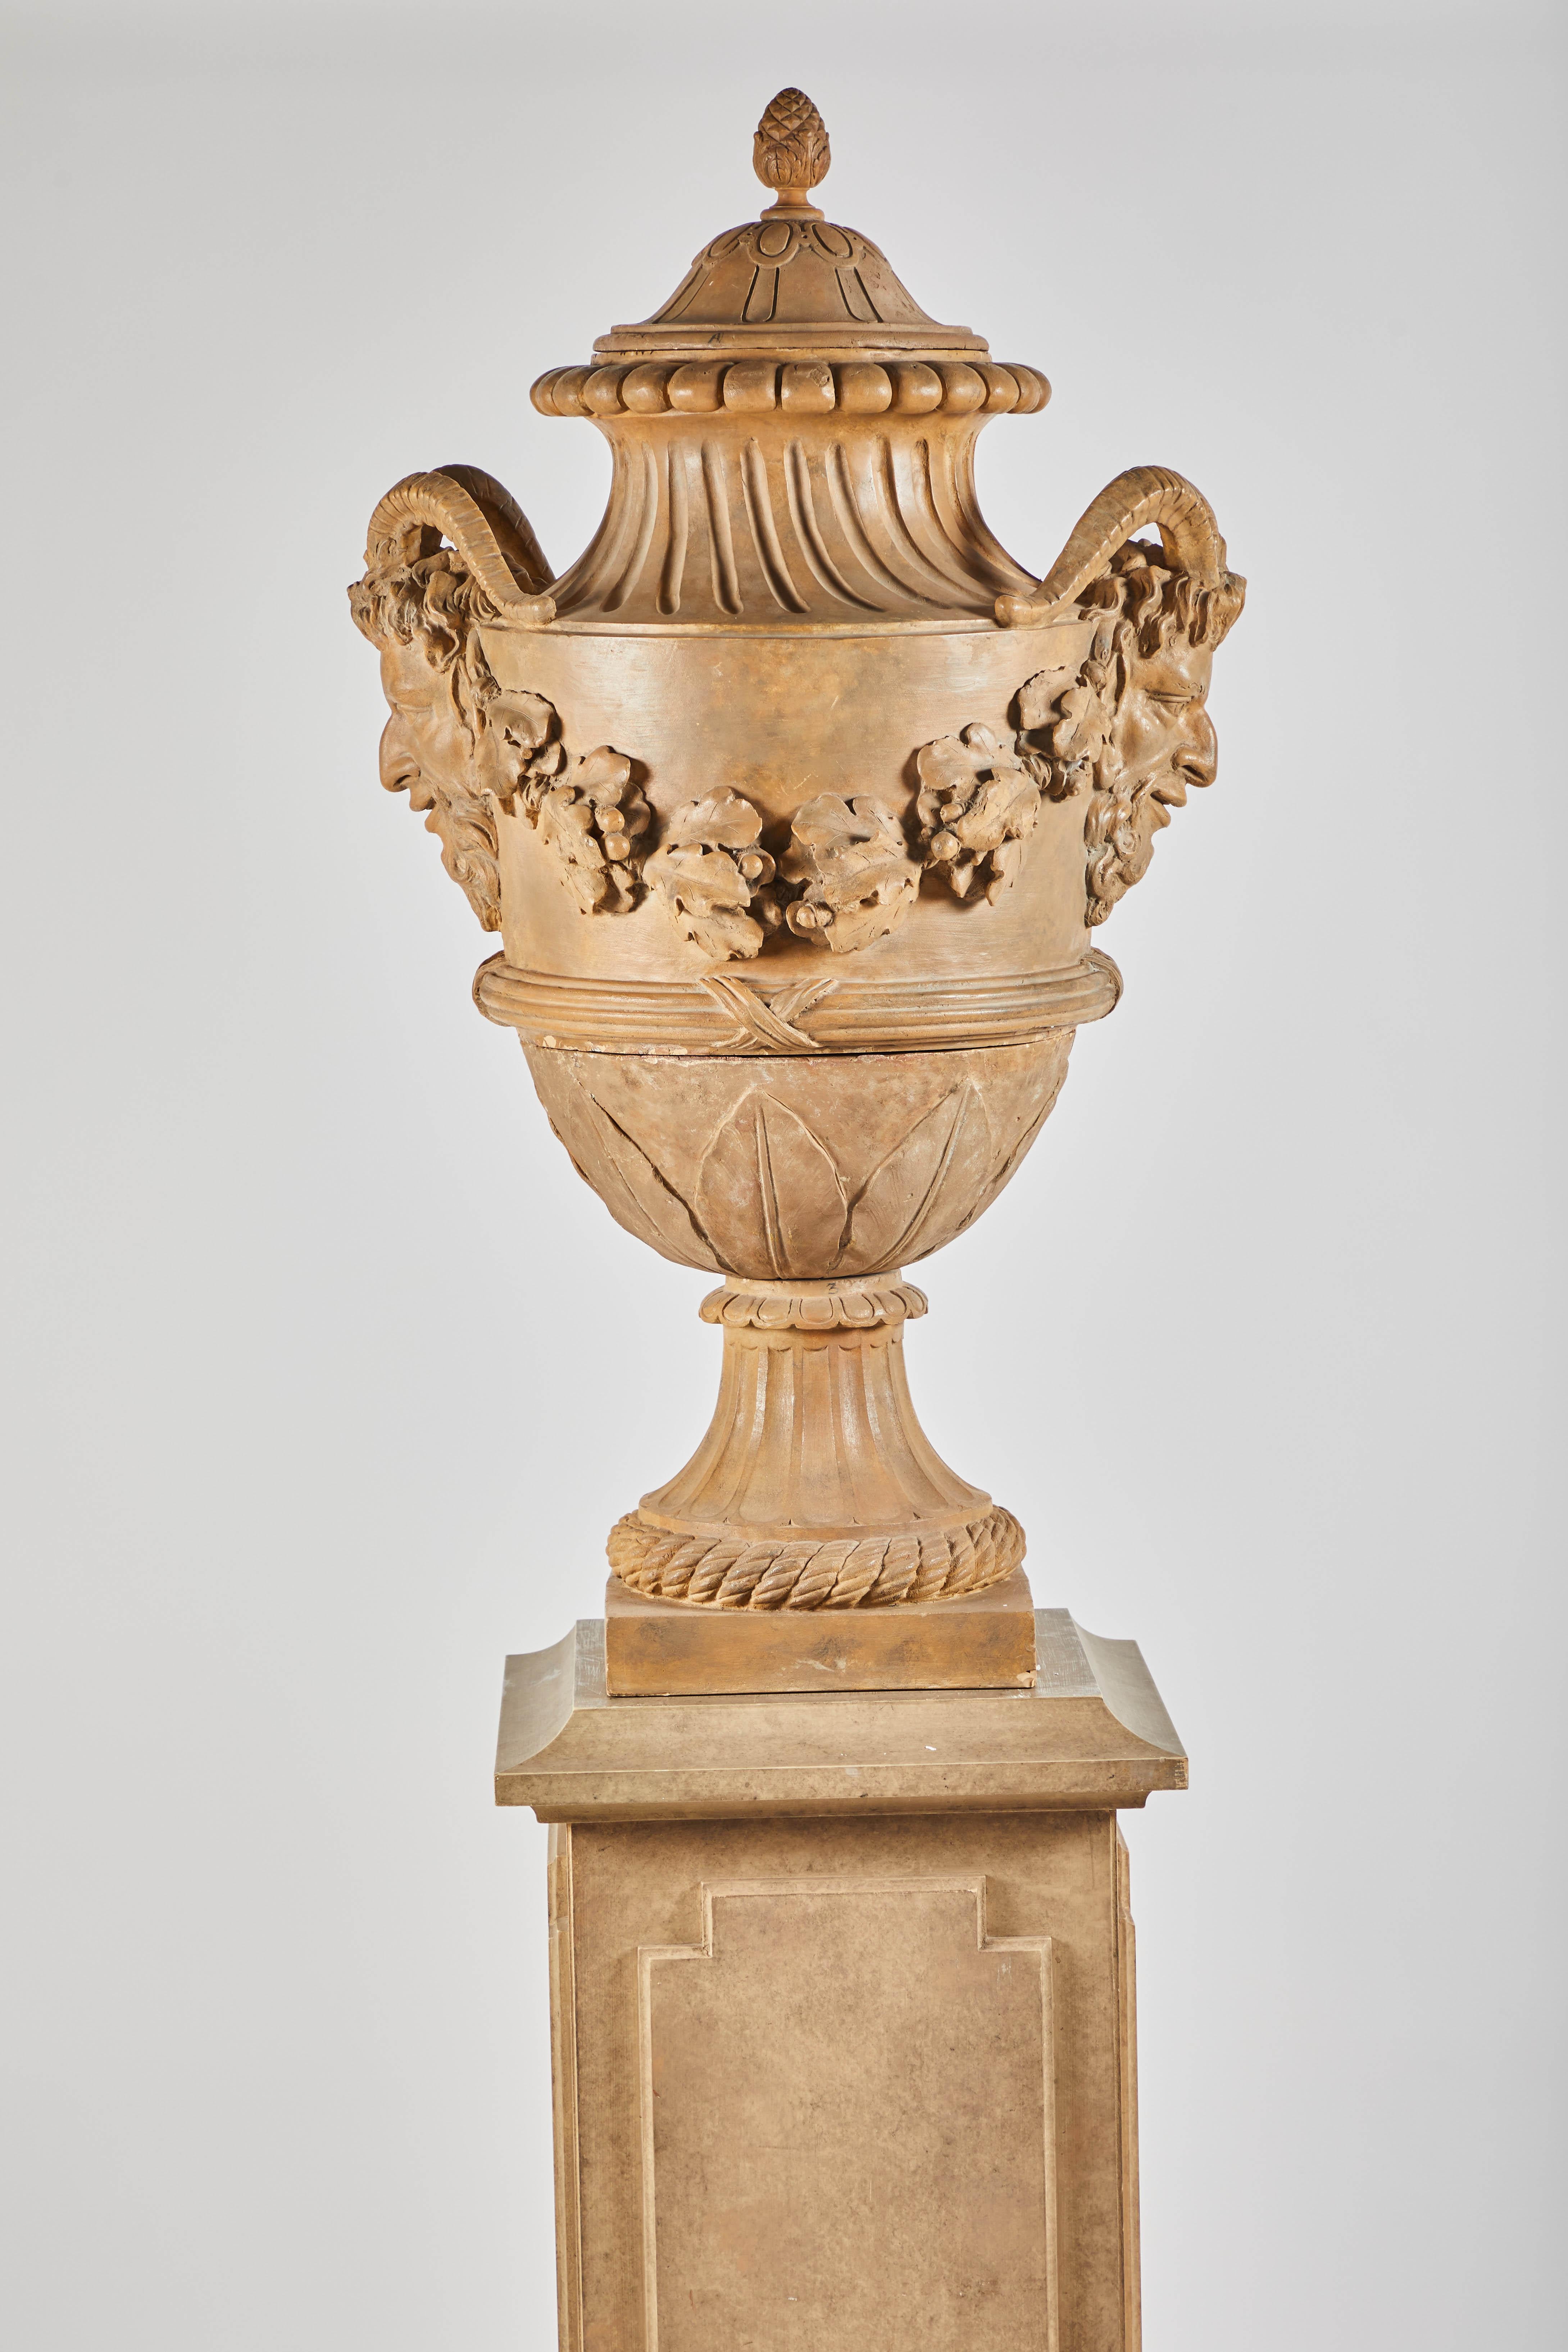 18th century terracotta covered urns on wood pedestals from the collection of Karl Lagerfeld. Extremely well-cast garlands swag between handles in the form of Satyrs.

Measures: 101.5